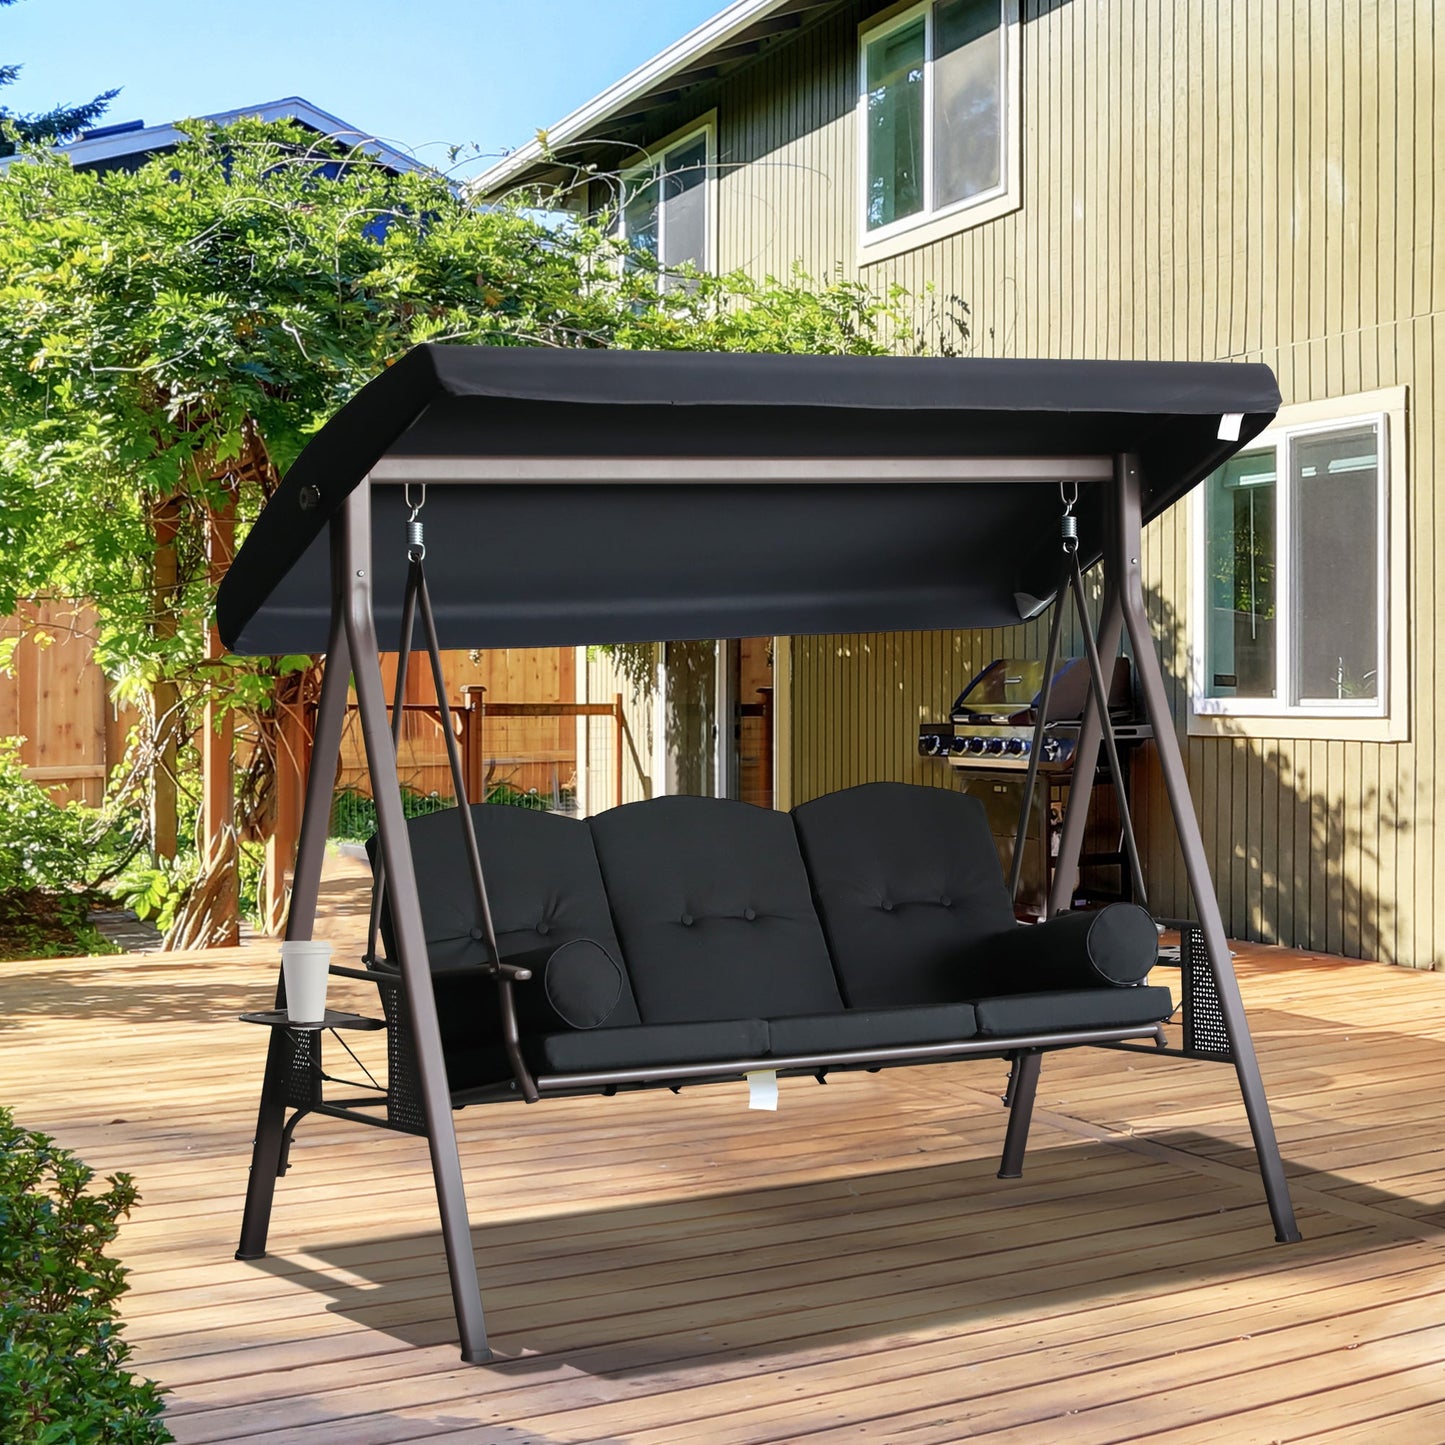 Outdoor and Garden-Outdoor Patio 3-Person Steel Canopy Cushioned Seat Bench Swing with Included Side Trays & Padded Comfort, Black - Outdoor Style Company